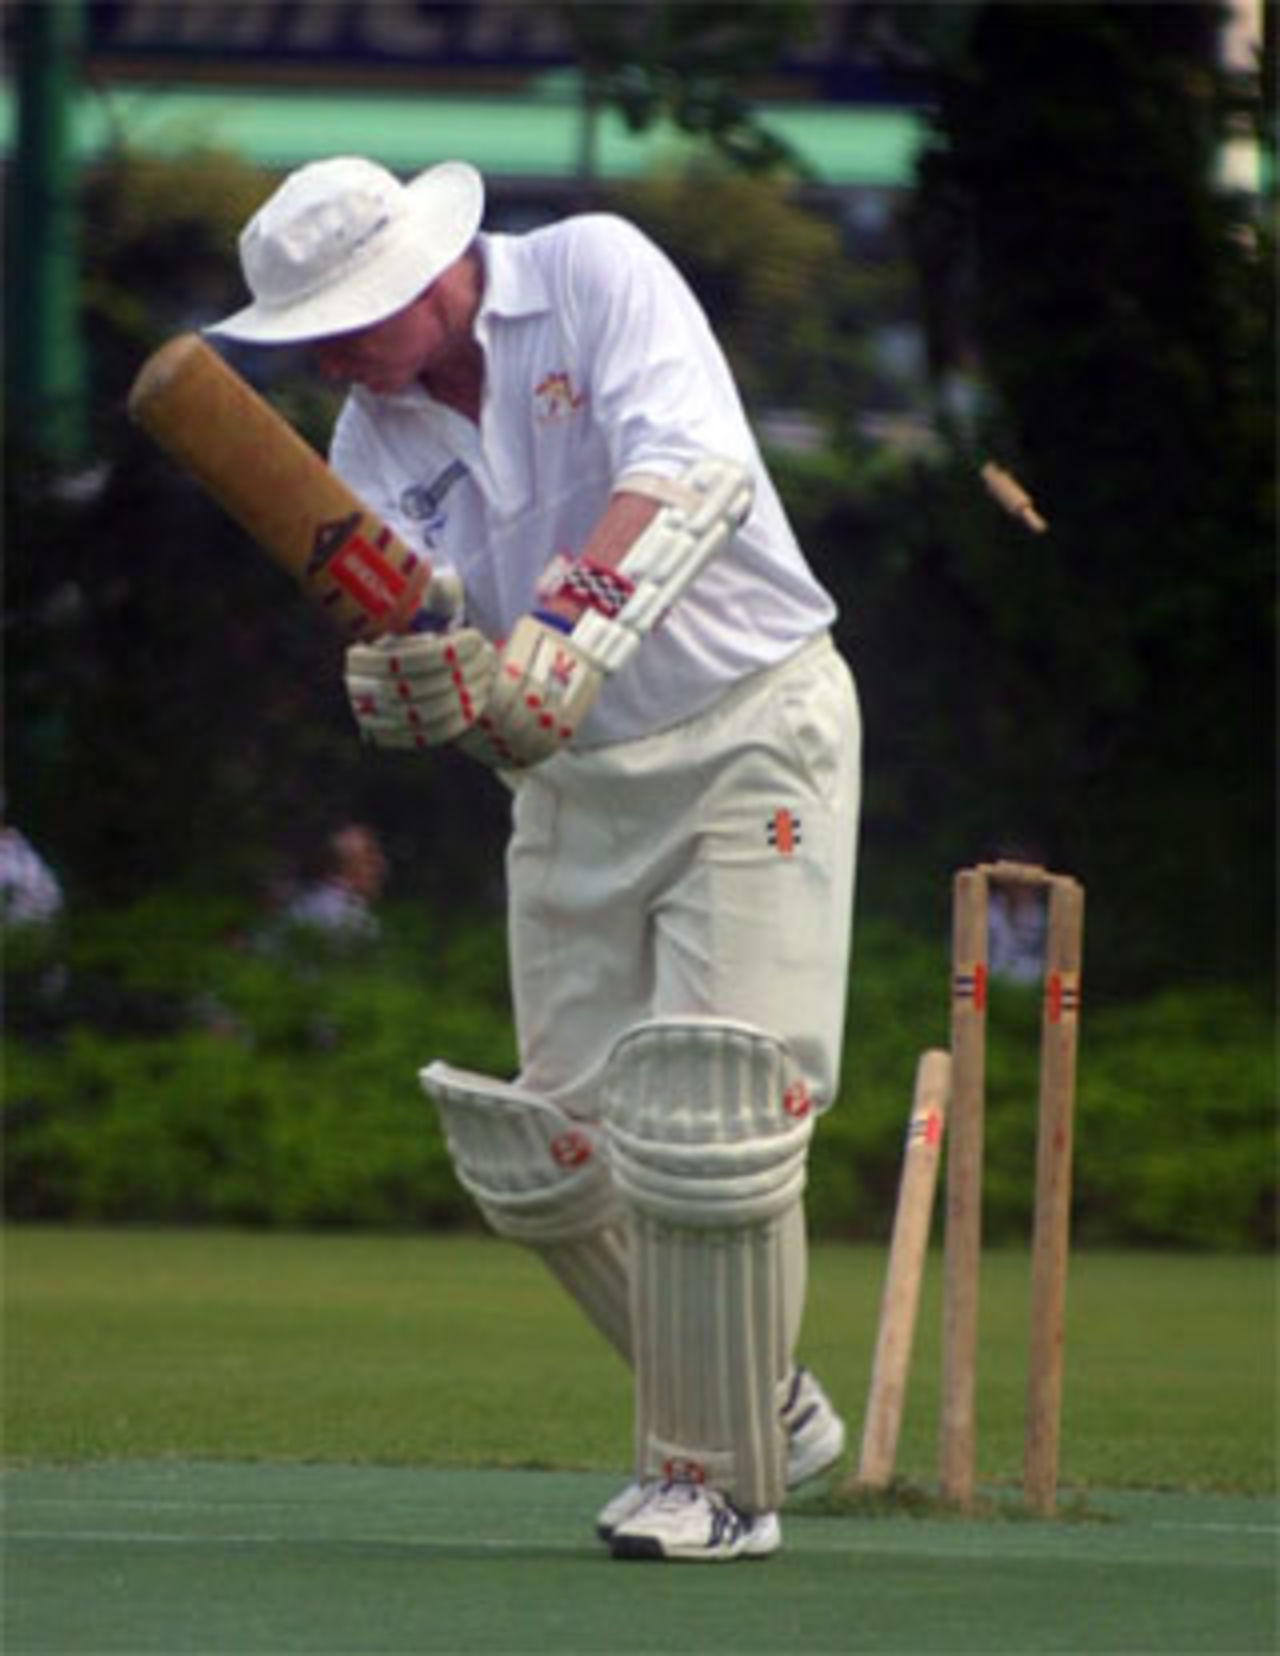 Crusaders' Ray Brewster is bowled during their match against Nomads in the 2003-04 season